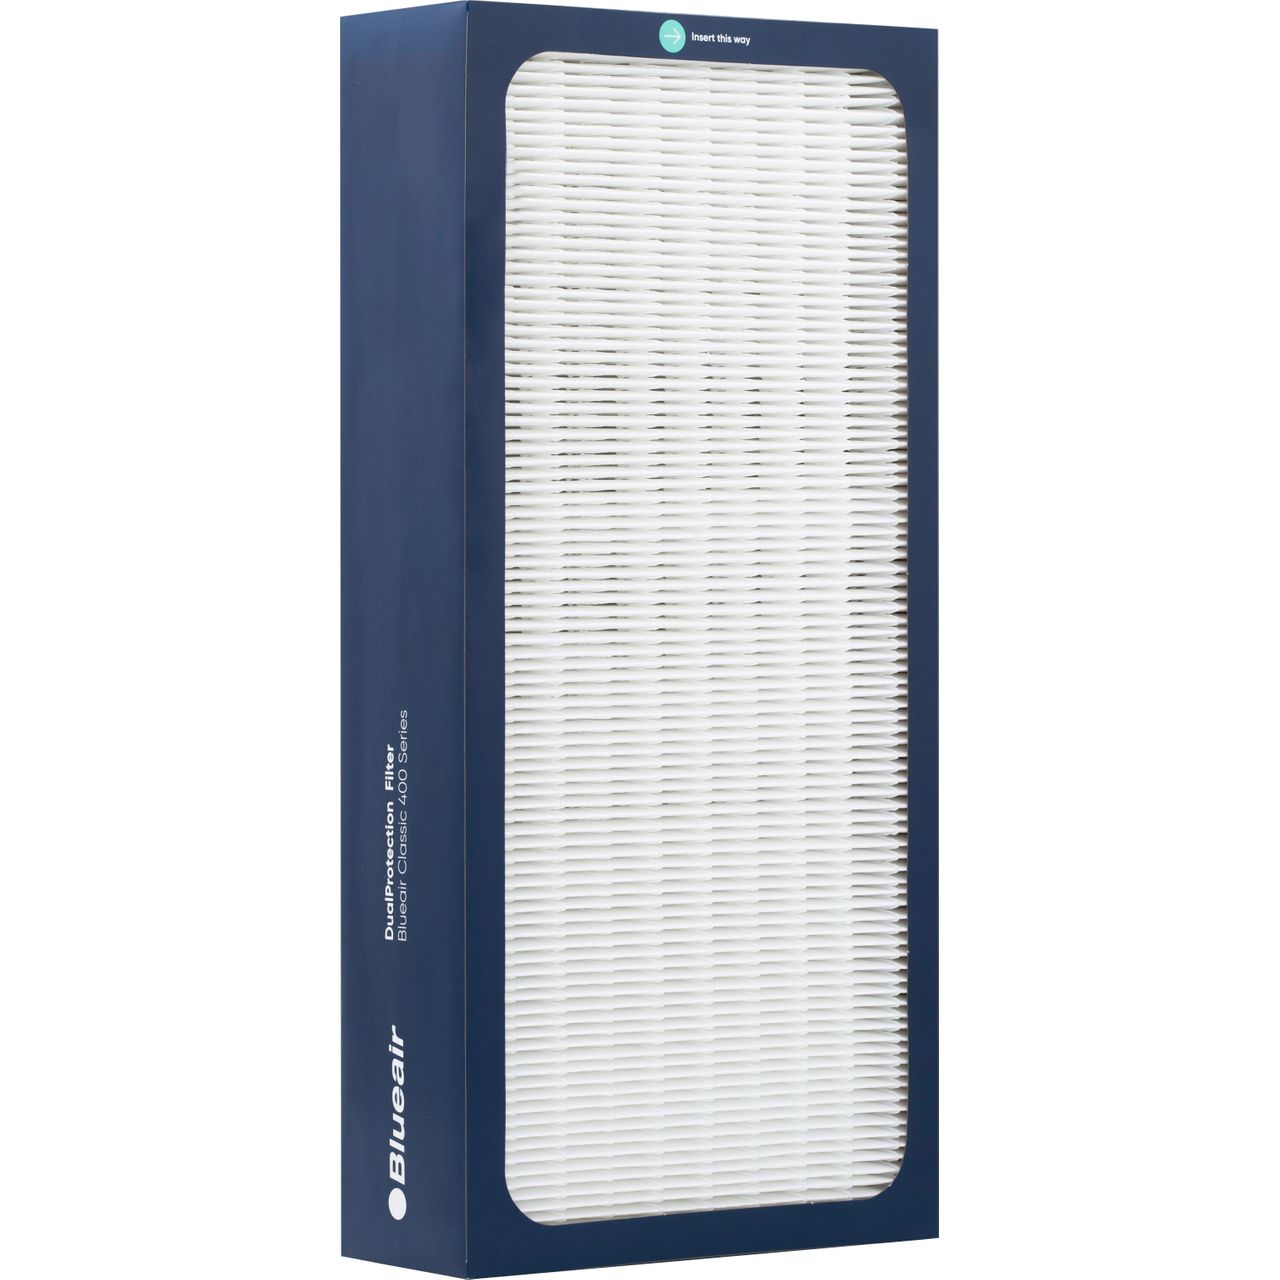 Blueair Classic 400 Series Particle Filter Review